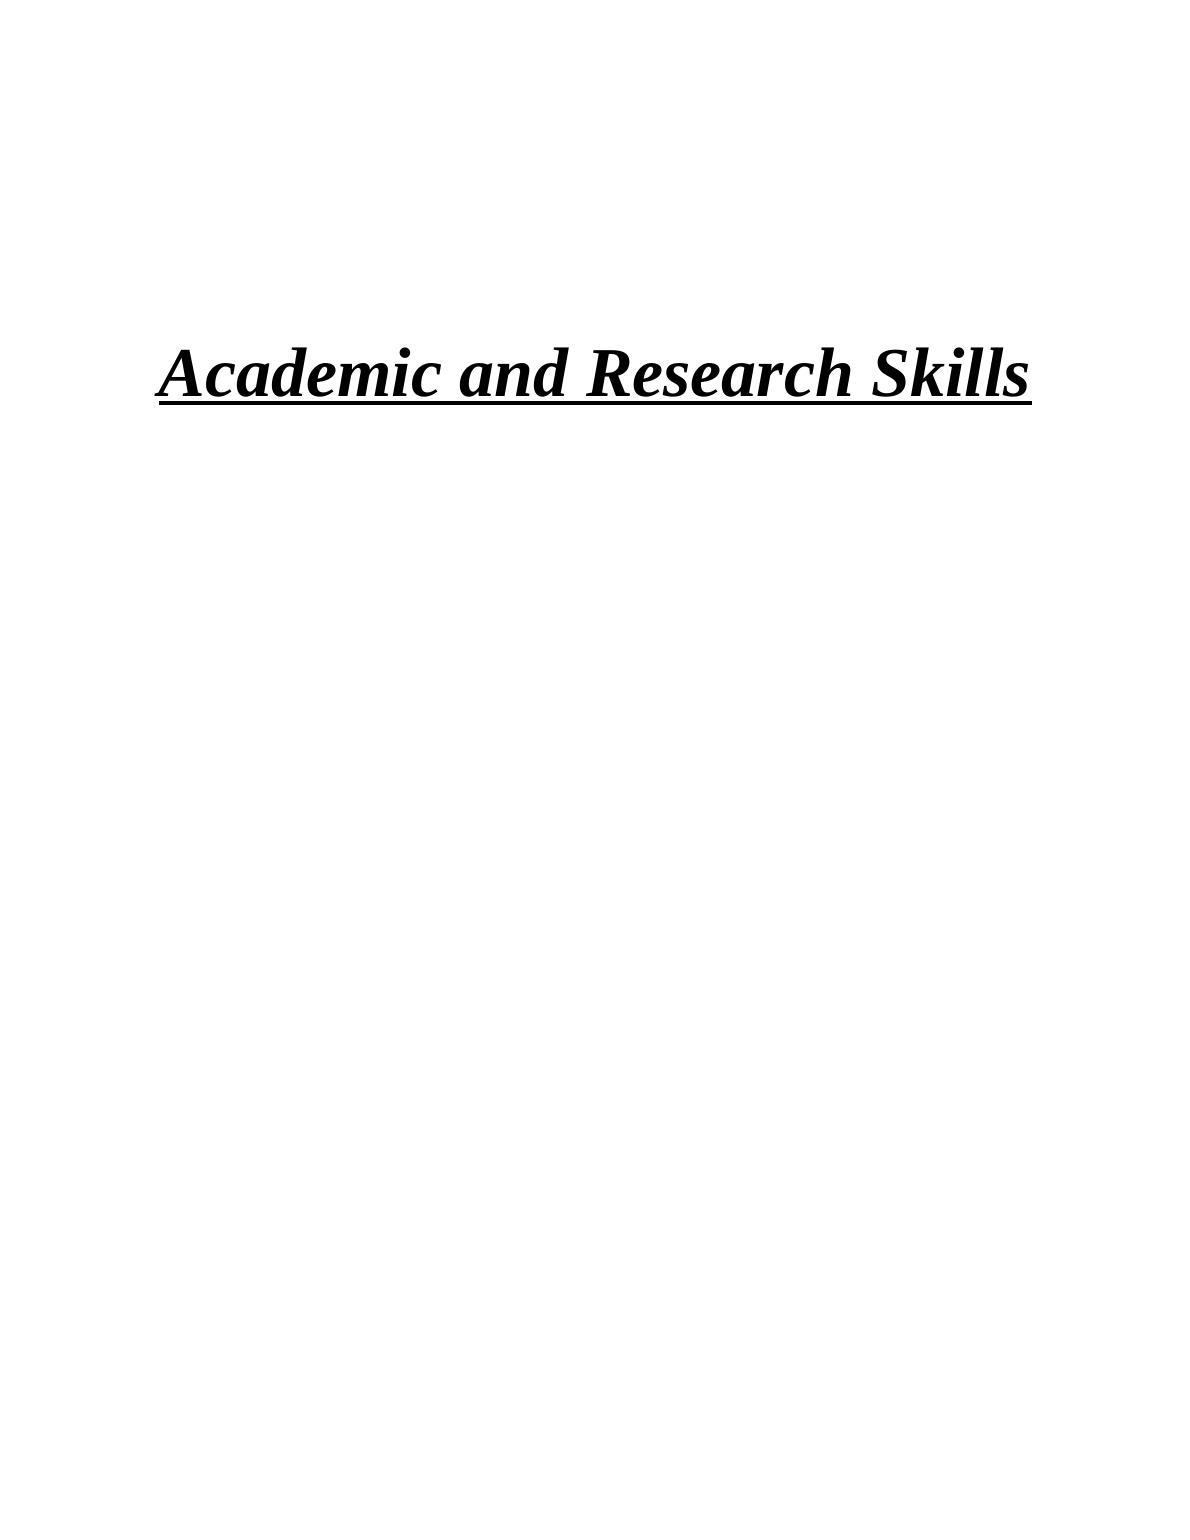 Personal development in academic and research skills_1